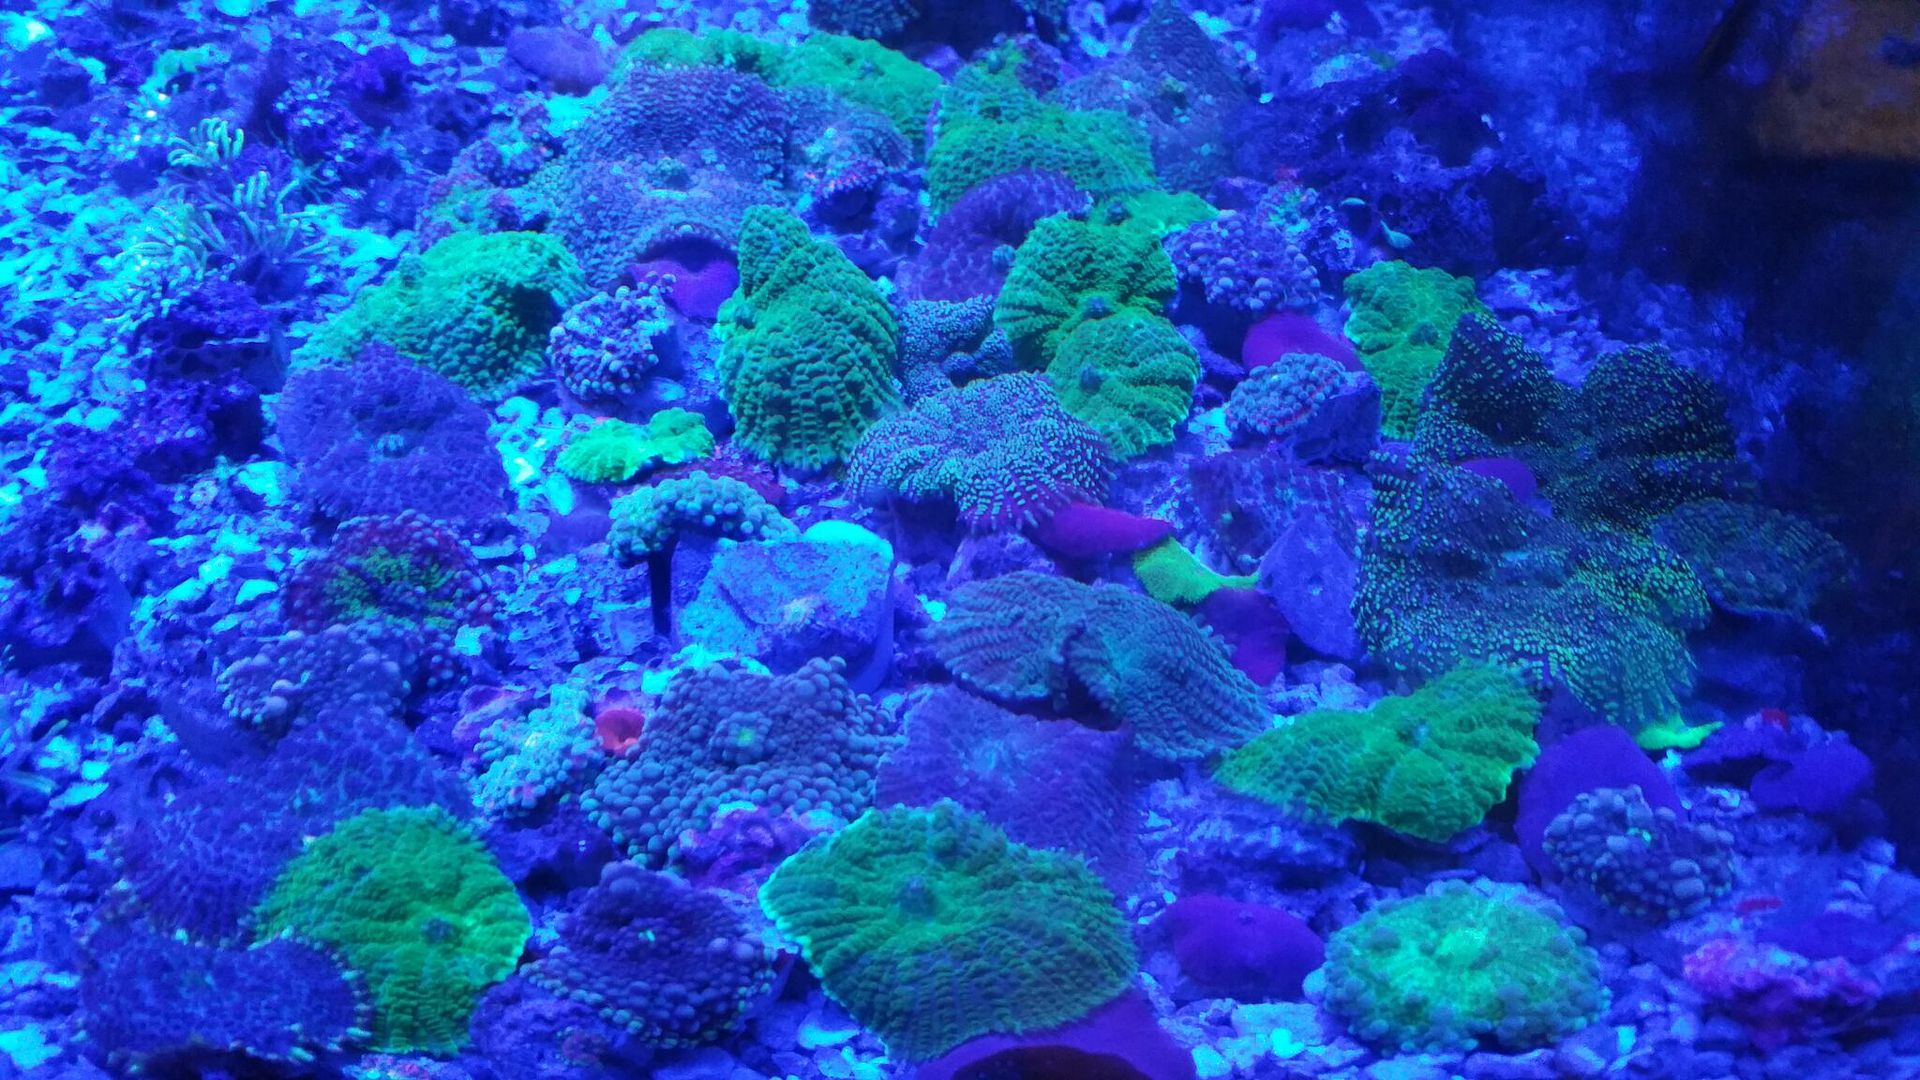 unspecified zps8ezhfh54 - Corals Galore! Great Deals! Only From Tropicorium!!!